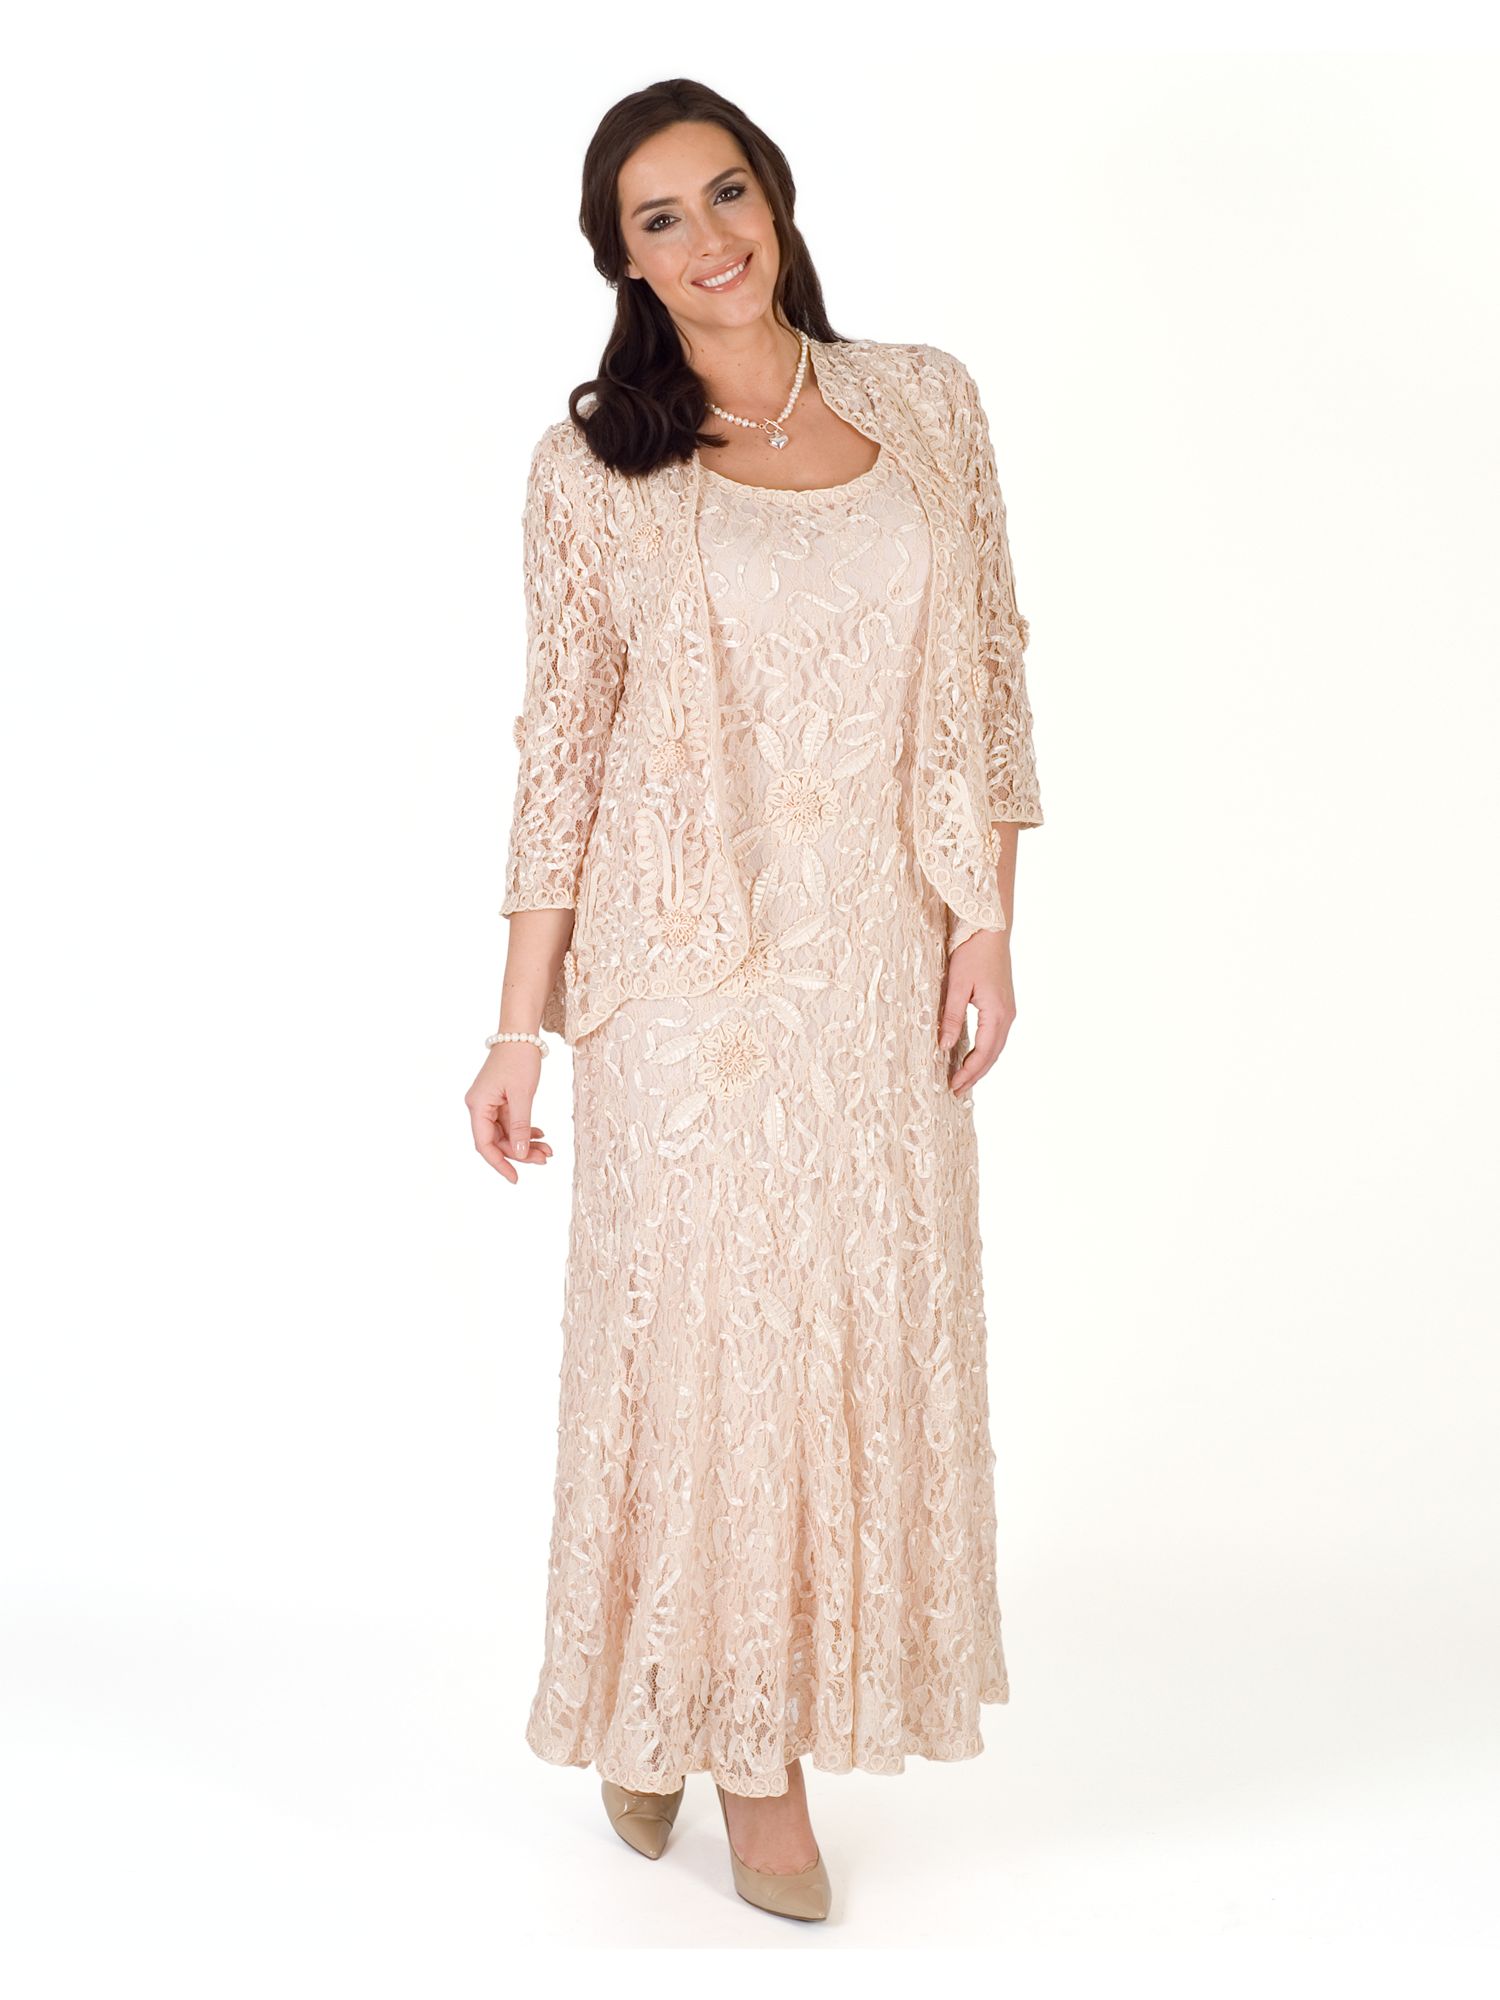 Chesca Lace Cornelli Dress, Champagne at John Lewis & Partners